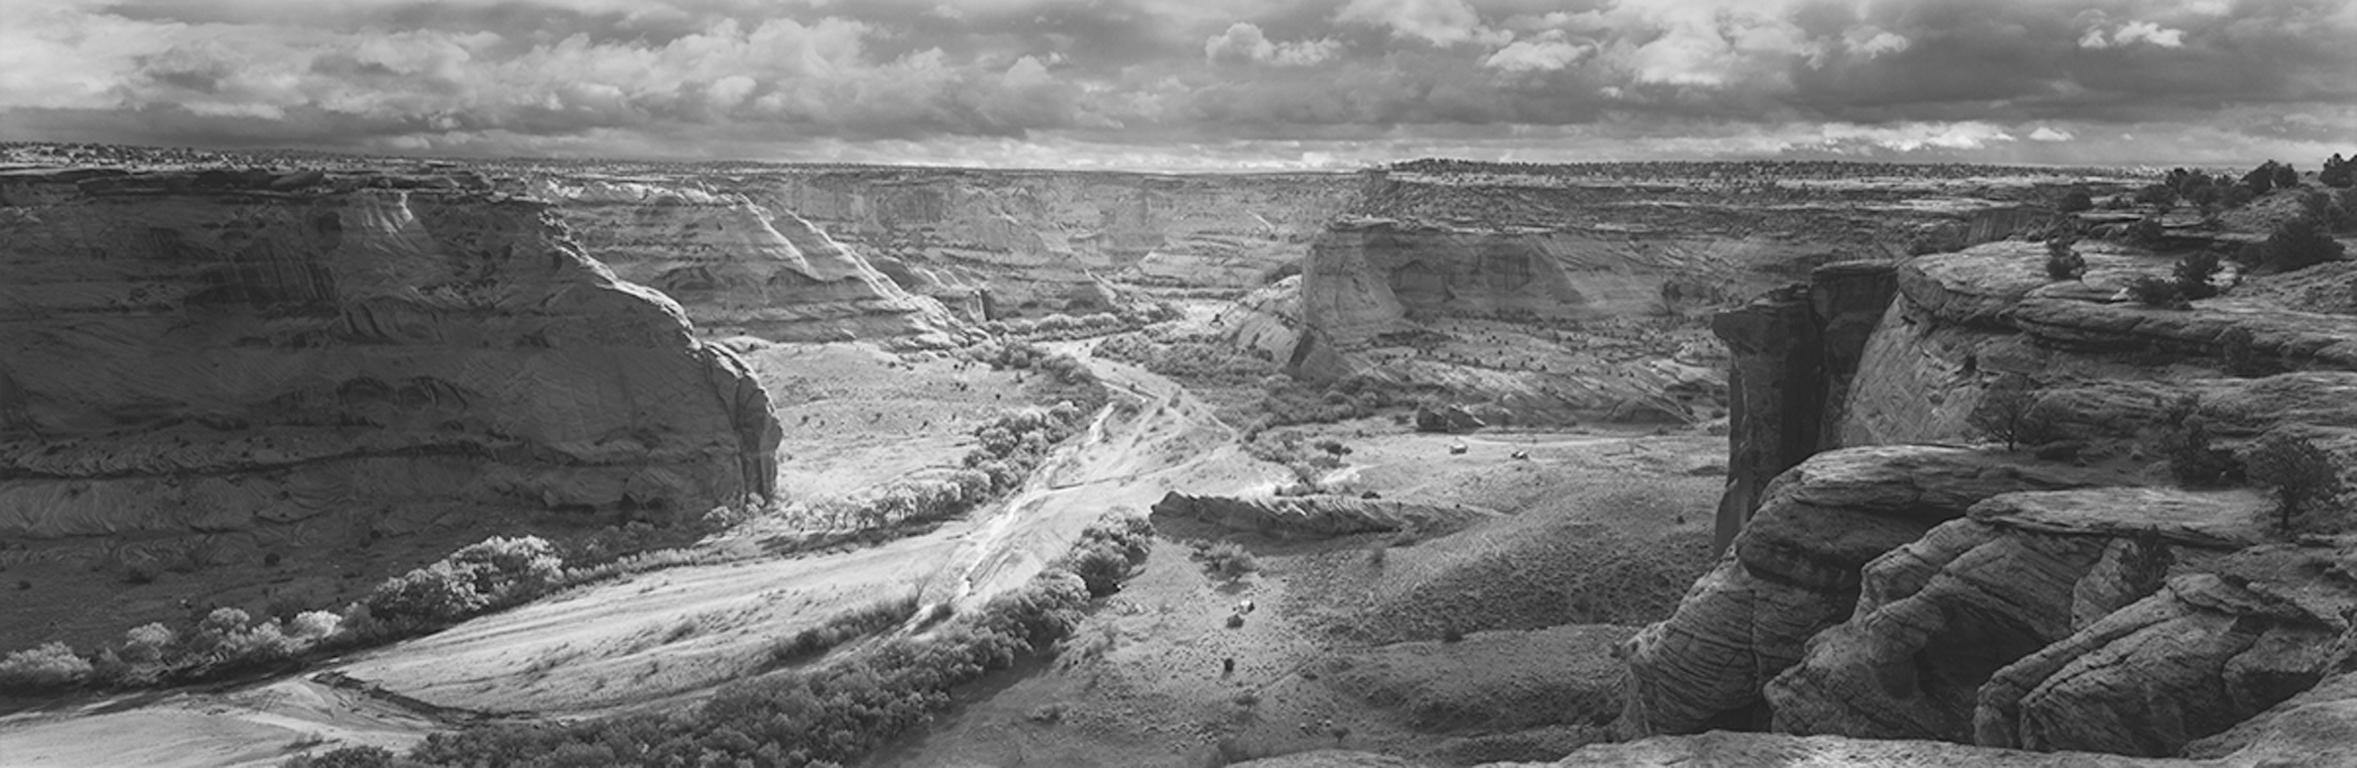 David H. Gibson Black and White Photograph - Storm Light Passage, Canyon de Chelly National Monument, Arizona